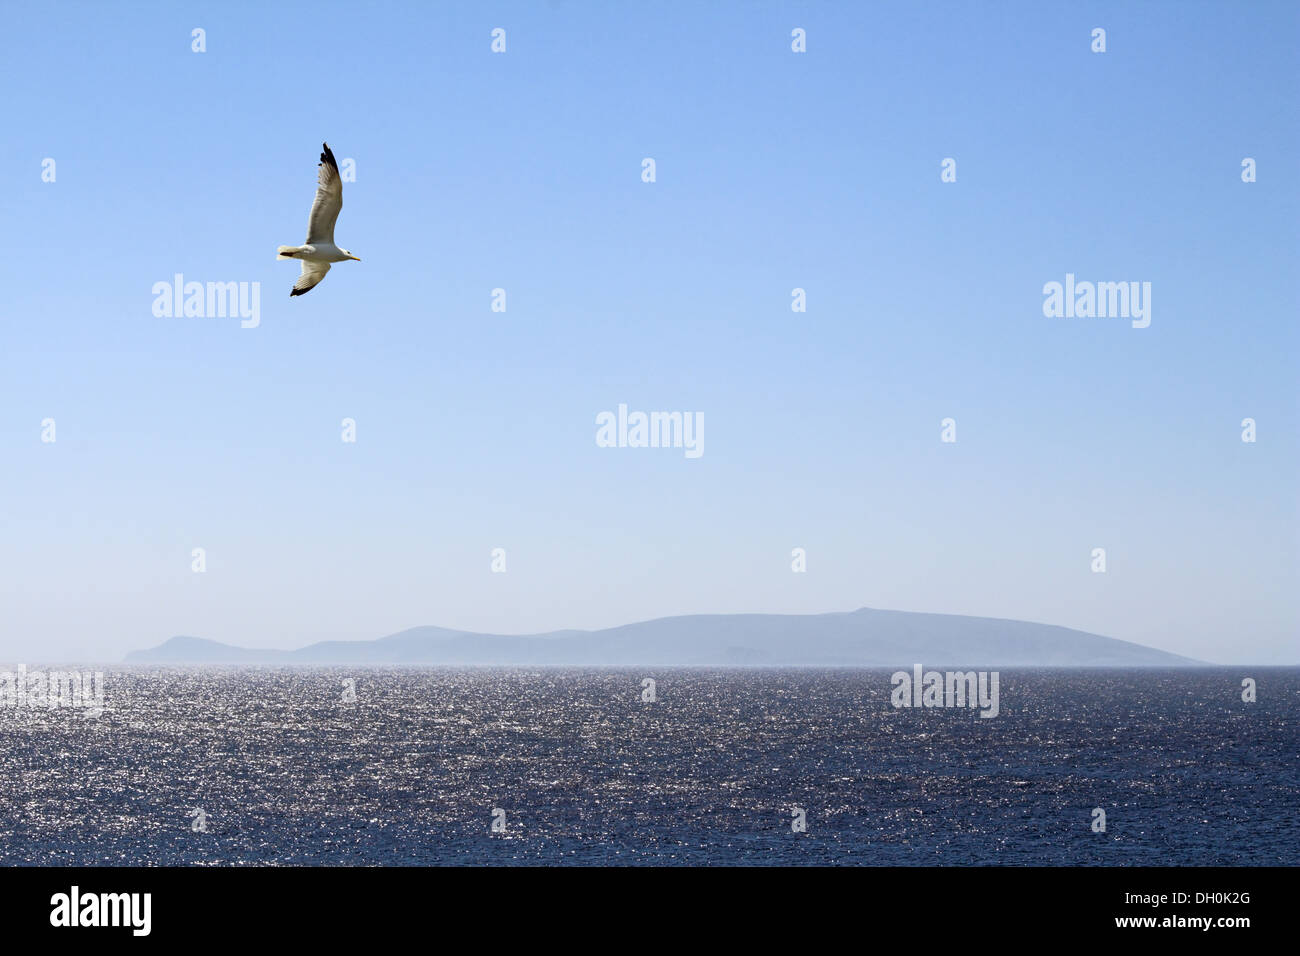 Looking to blue Aegean seascape, single island in the background Stock Photo